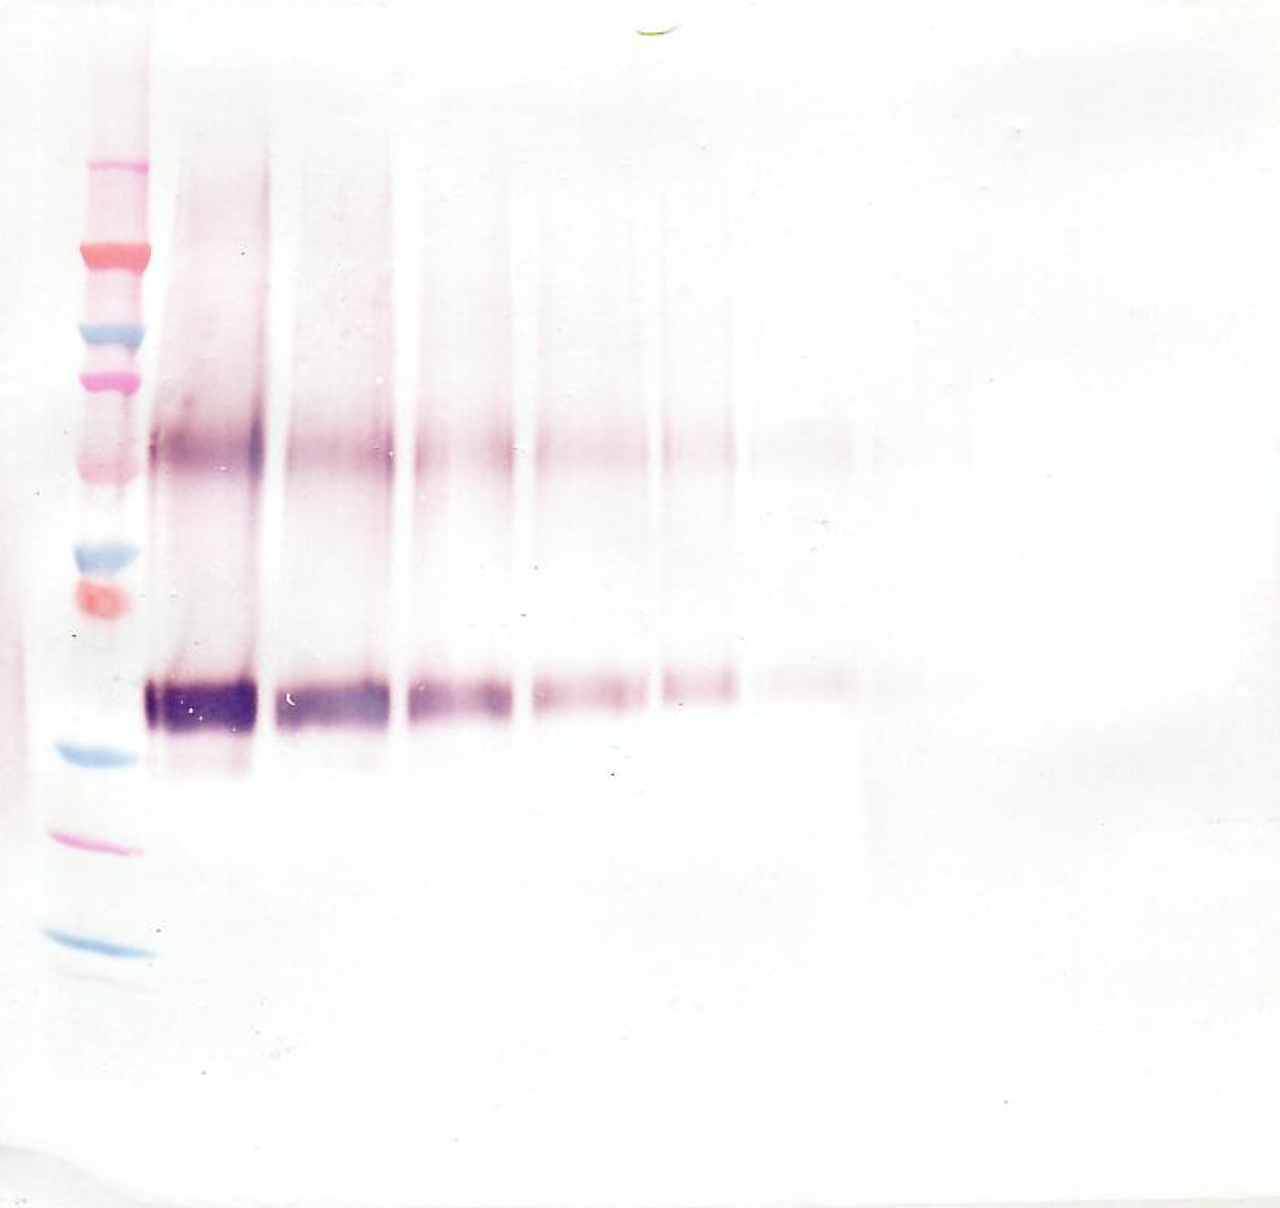 To detect hWNT-1 by Western Blot analysis this antibody can be used at a concentration of 0.1 - 0.2 ug/ml. Used in conjunction with compatible secondary reagents the detection limit for recombinant hWNT-1 is 1.5 - 3.0 ng/lane, under either reducing or non-reducing conditions.